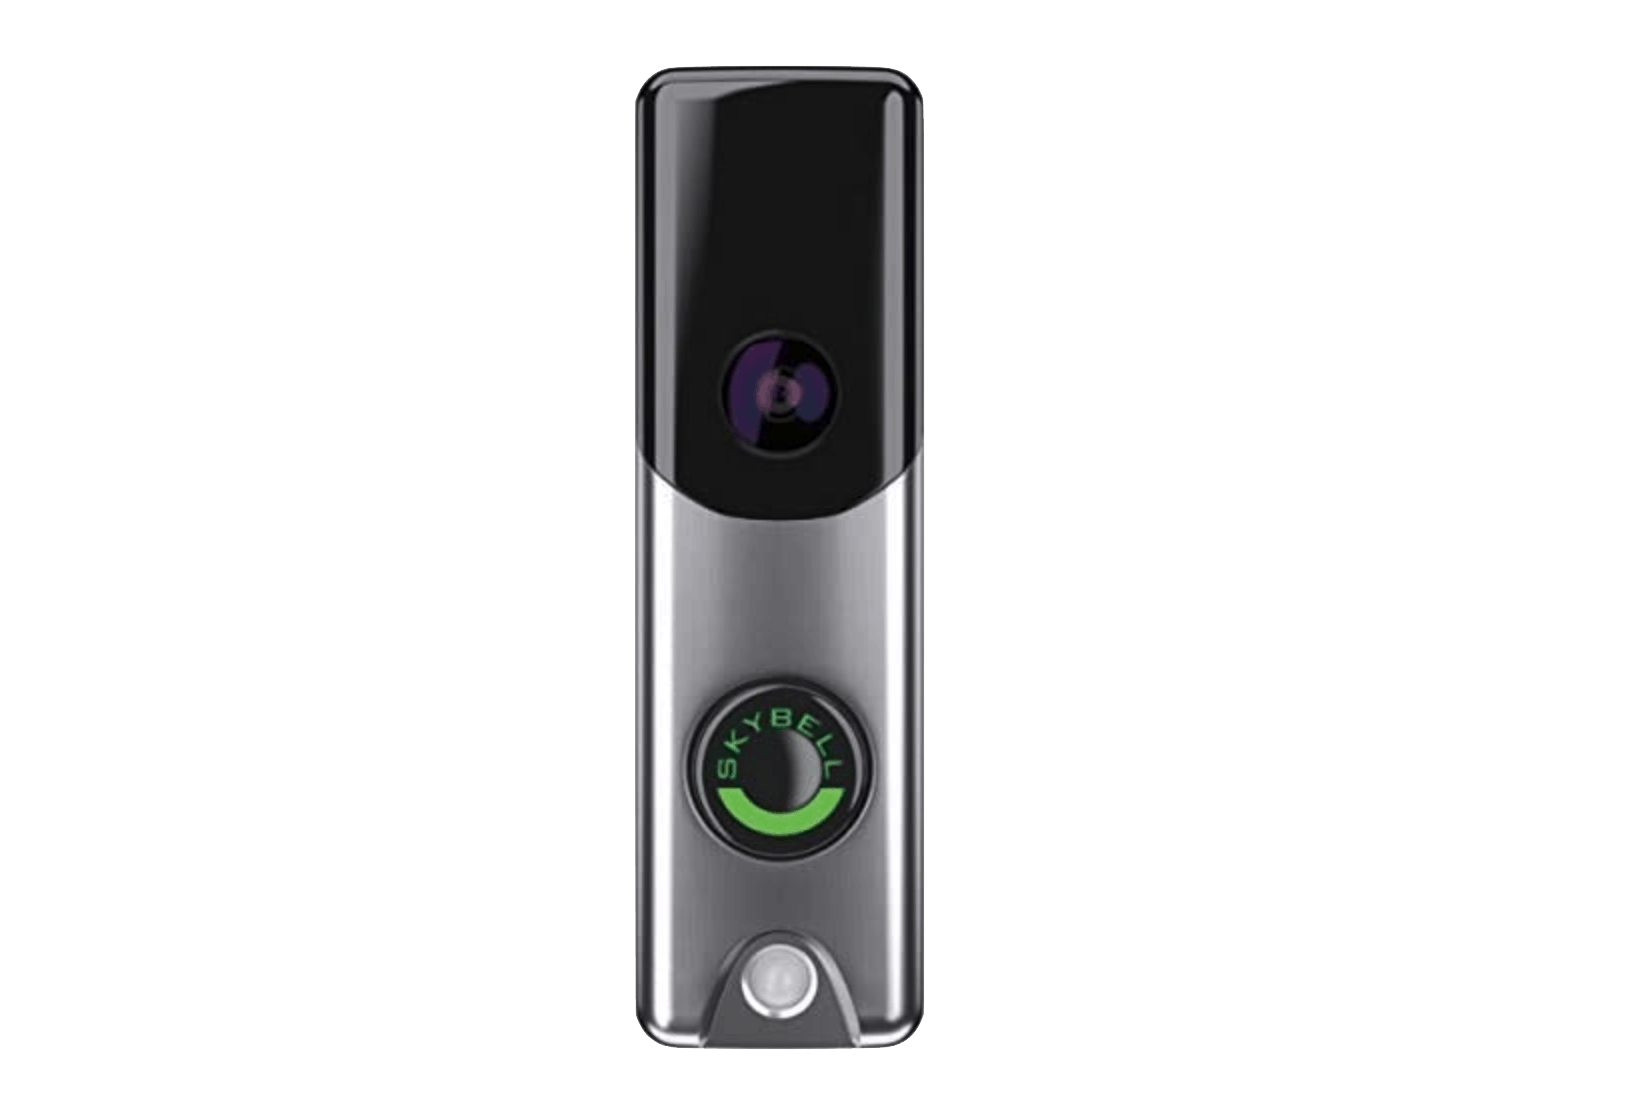 SkyBell Video Doorbell Camera - Product Image